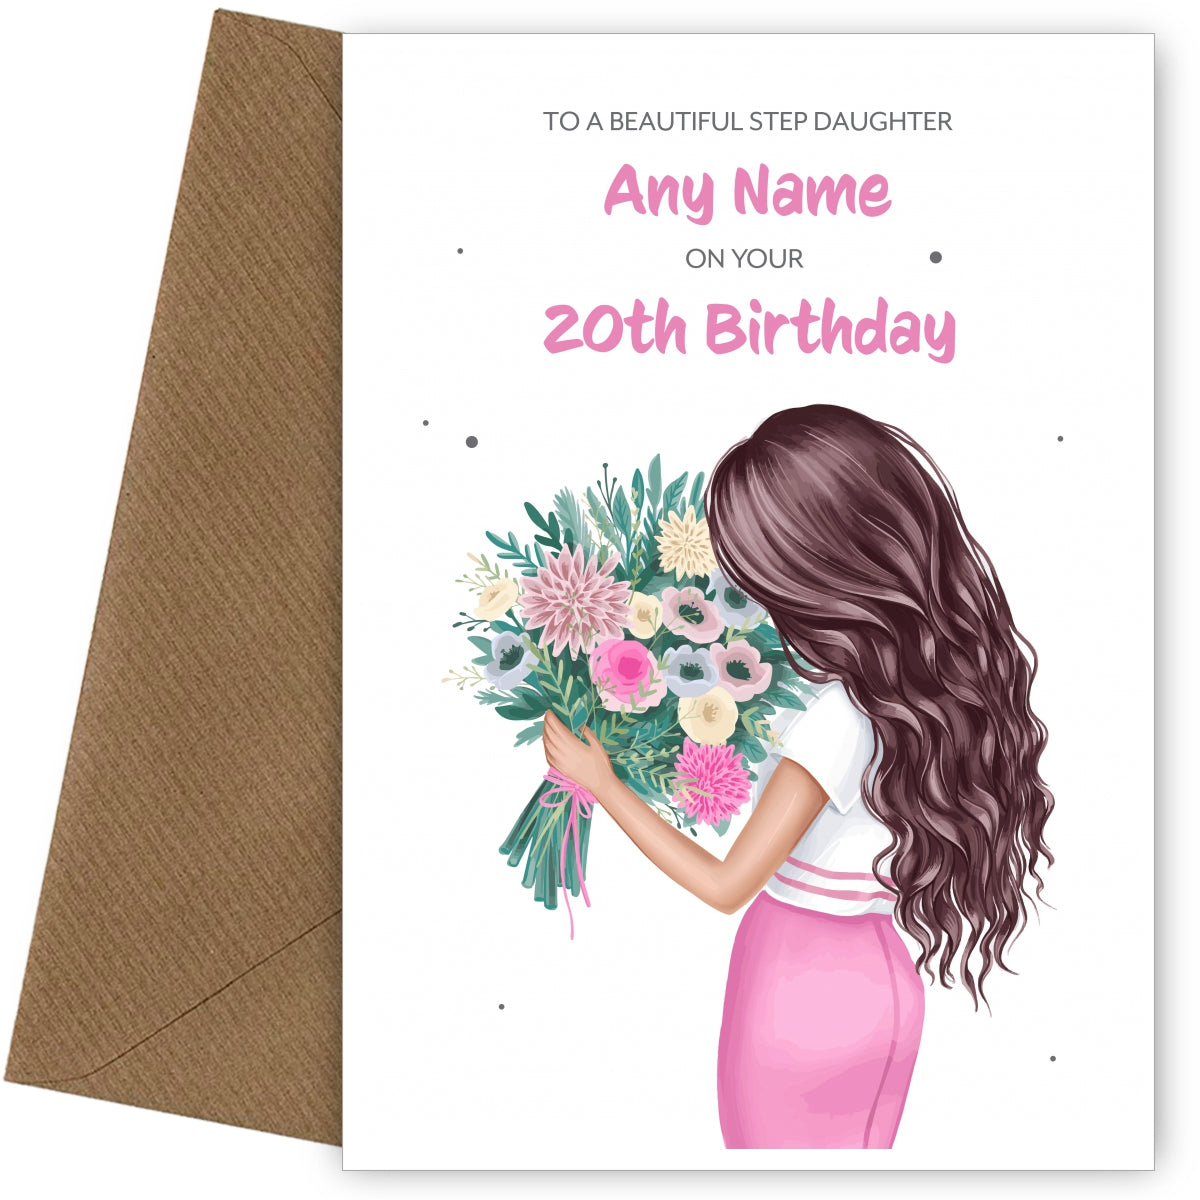 20th Birthday Card for Step Daughter - Beautiful Brunette